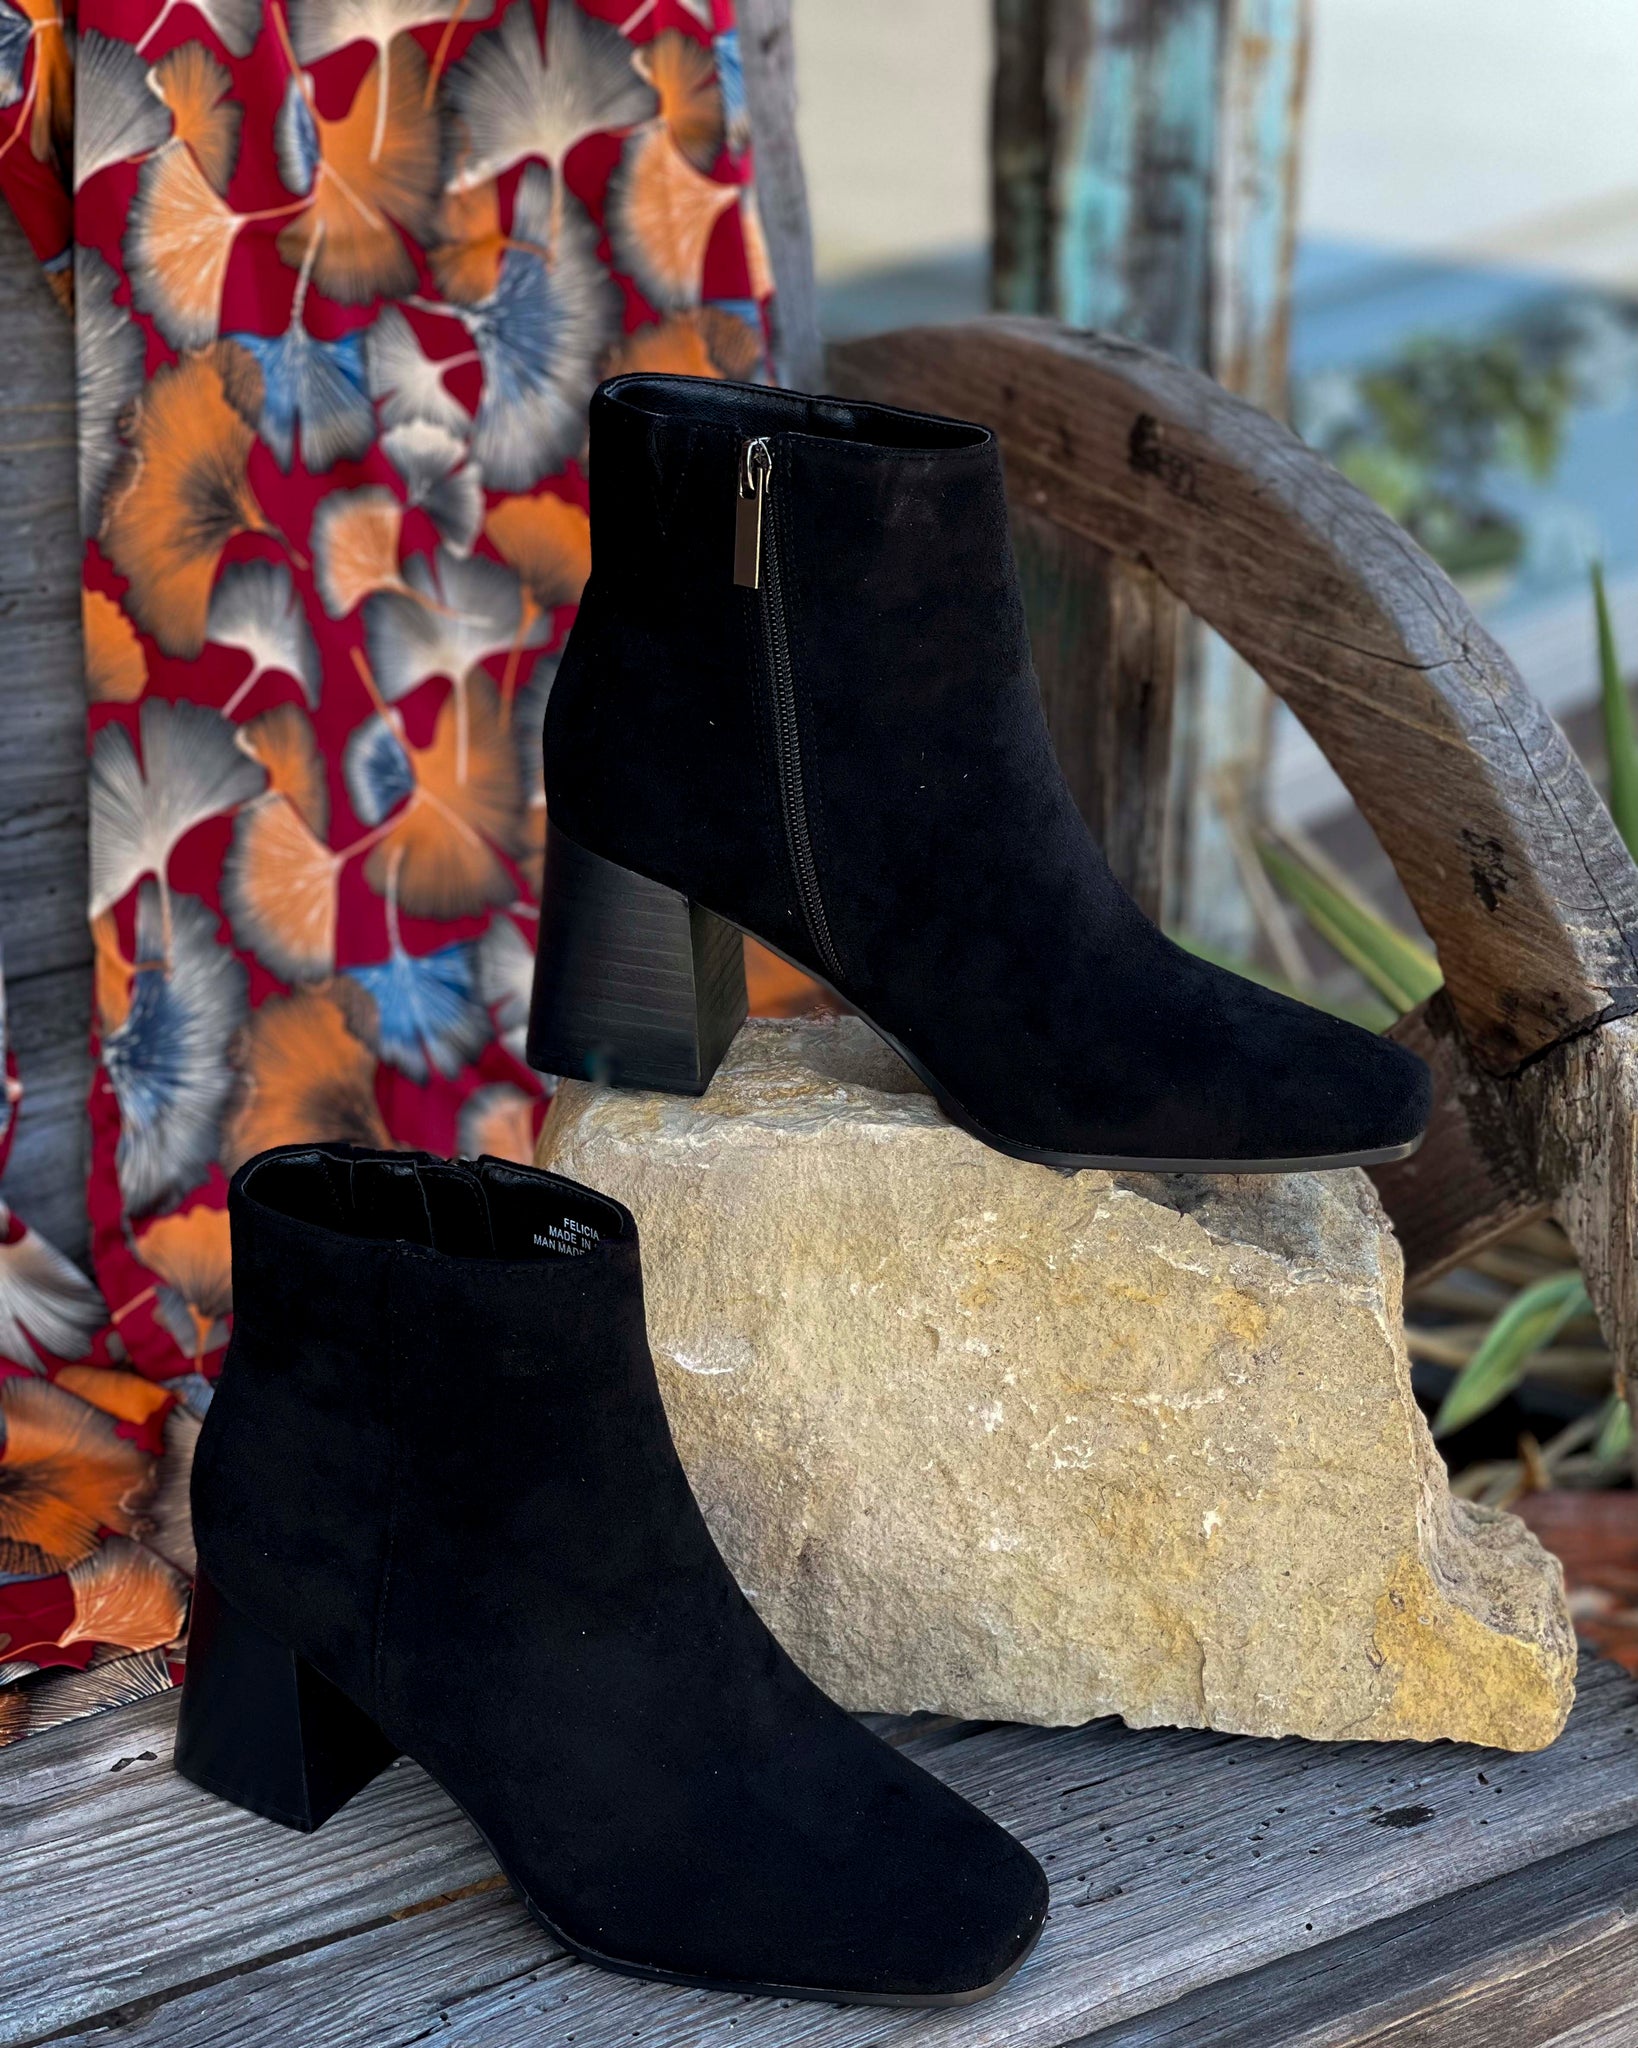 FELICIA BLACK SUEDE BOOT BY CORKY'S - BLACK